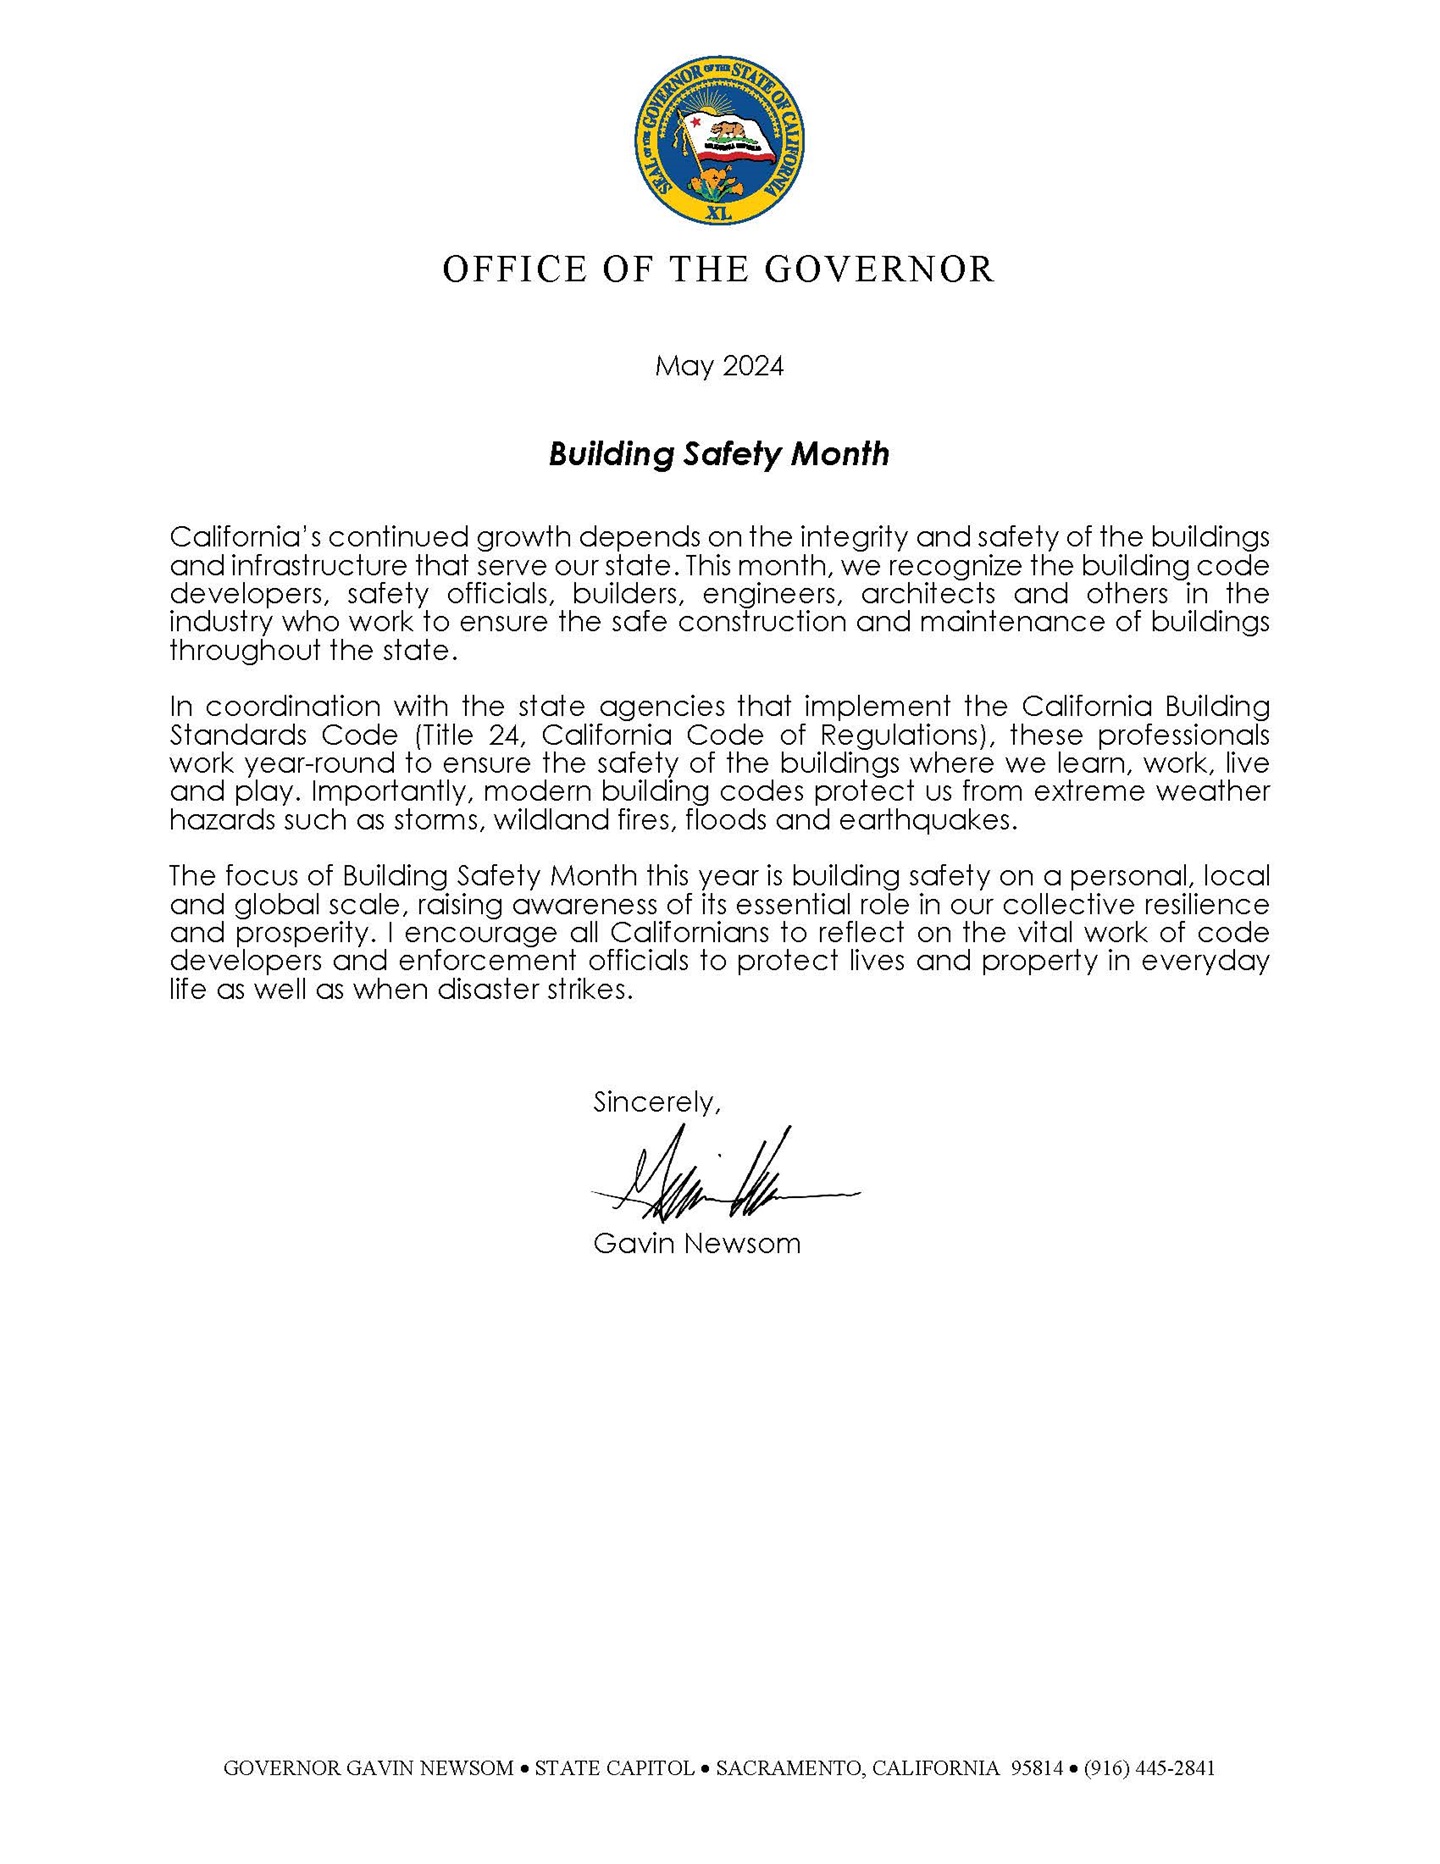 State of California OFFICE OF THE GOVERNOR  May 2024  Building Safety Month  California’s continued growth depends on the integrity and safety of the buildings and infrastructure that serve our state. This month, we recognize the building code developers, safety officials, builders, engineers, architects and others in the industry who work to ensure the safe construction and maintenance of buildings throughout the state.  In coordination with the state agencies that implement the California Building Standards Code (Title 24, California Code of Regulations), these professionals work year-round to ensure the safety of the buildings where we learn, work, live and play. Importantly, modern building codes protect us from extreme weather hazards such as storms, wildland fires, floods and earthquakes.  The focus of Building Safety Month this year is building safety on a personal, local and global scale, raising awareness of its essential role in our collective resilience and prosperity. I encourage all Californians to reflect on the vital work of code developers and enforcement officials to protect lives and property in everyday life as well as when disaster strikes.  Sincerely,  Gavin Newsom